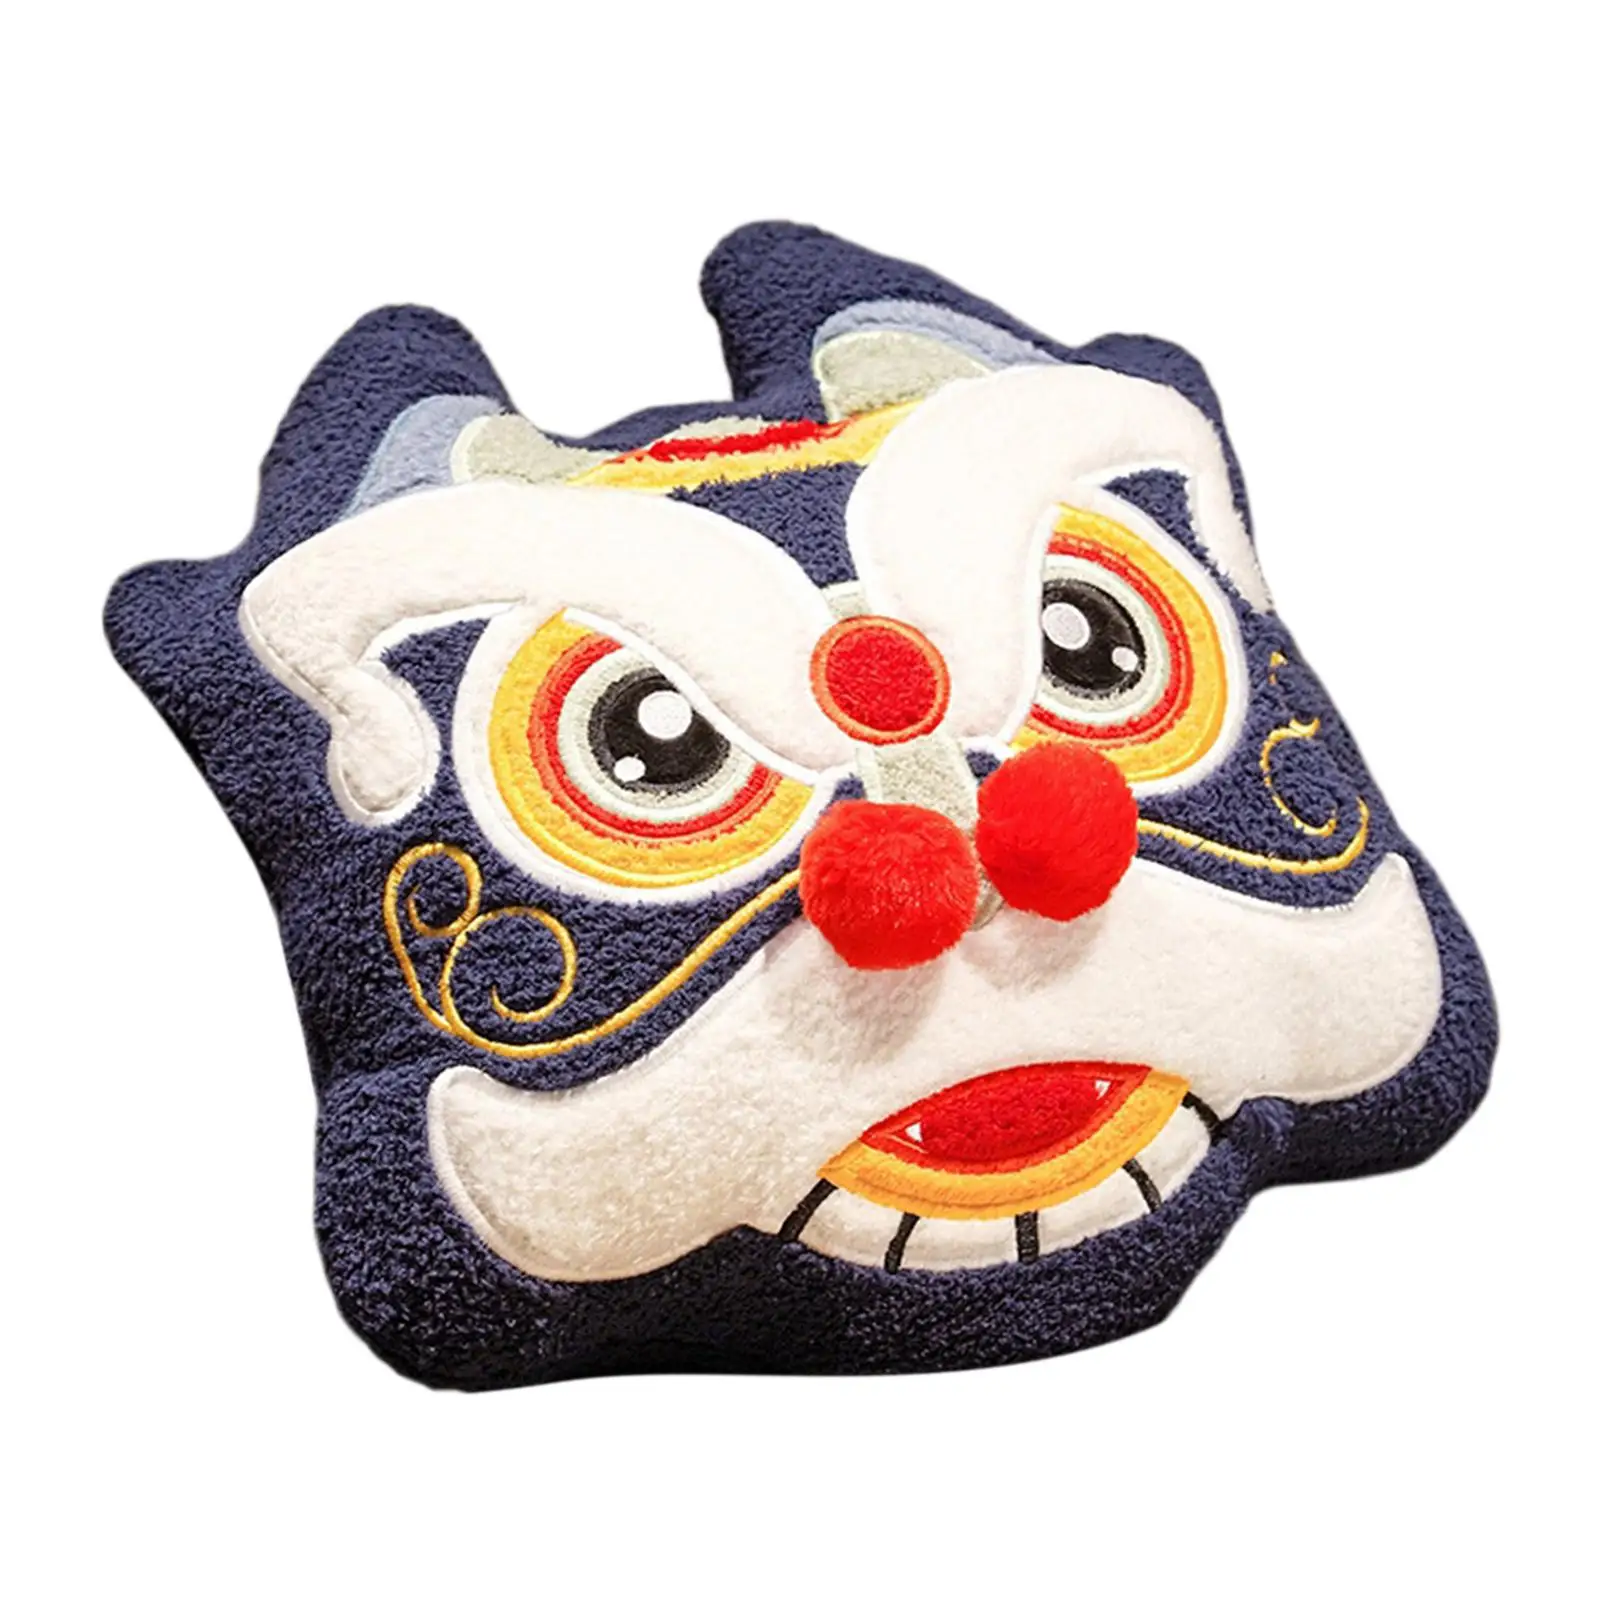 Traditional Chinese Style Pillow Comfortable Decoration Back Cushion Photo Props Seat Cushion for Centerpieces Wedding